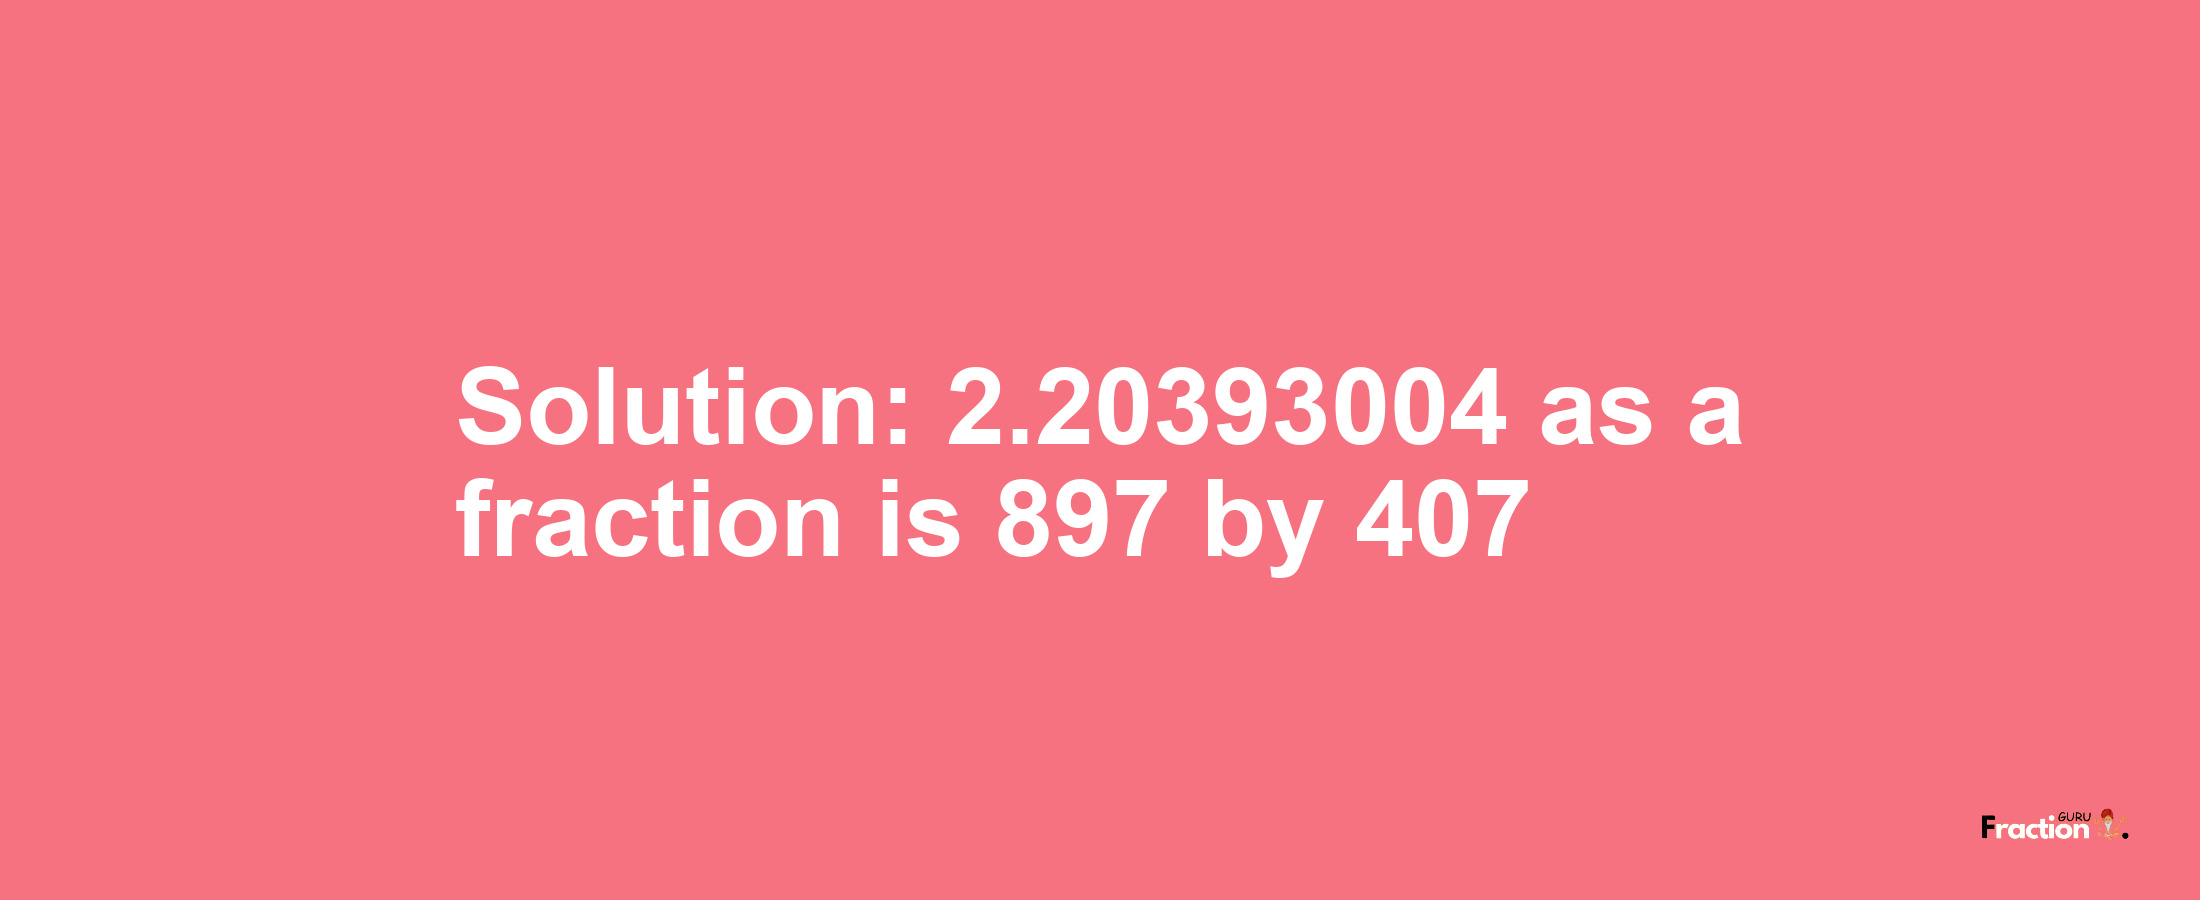 Solution:2.20393004 as a fraction is 897/407